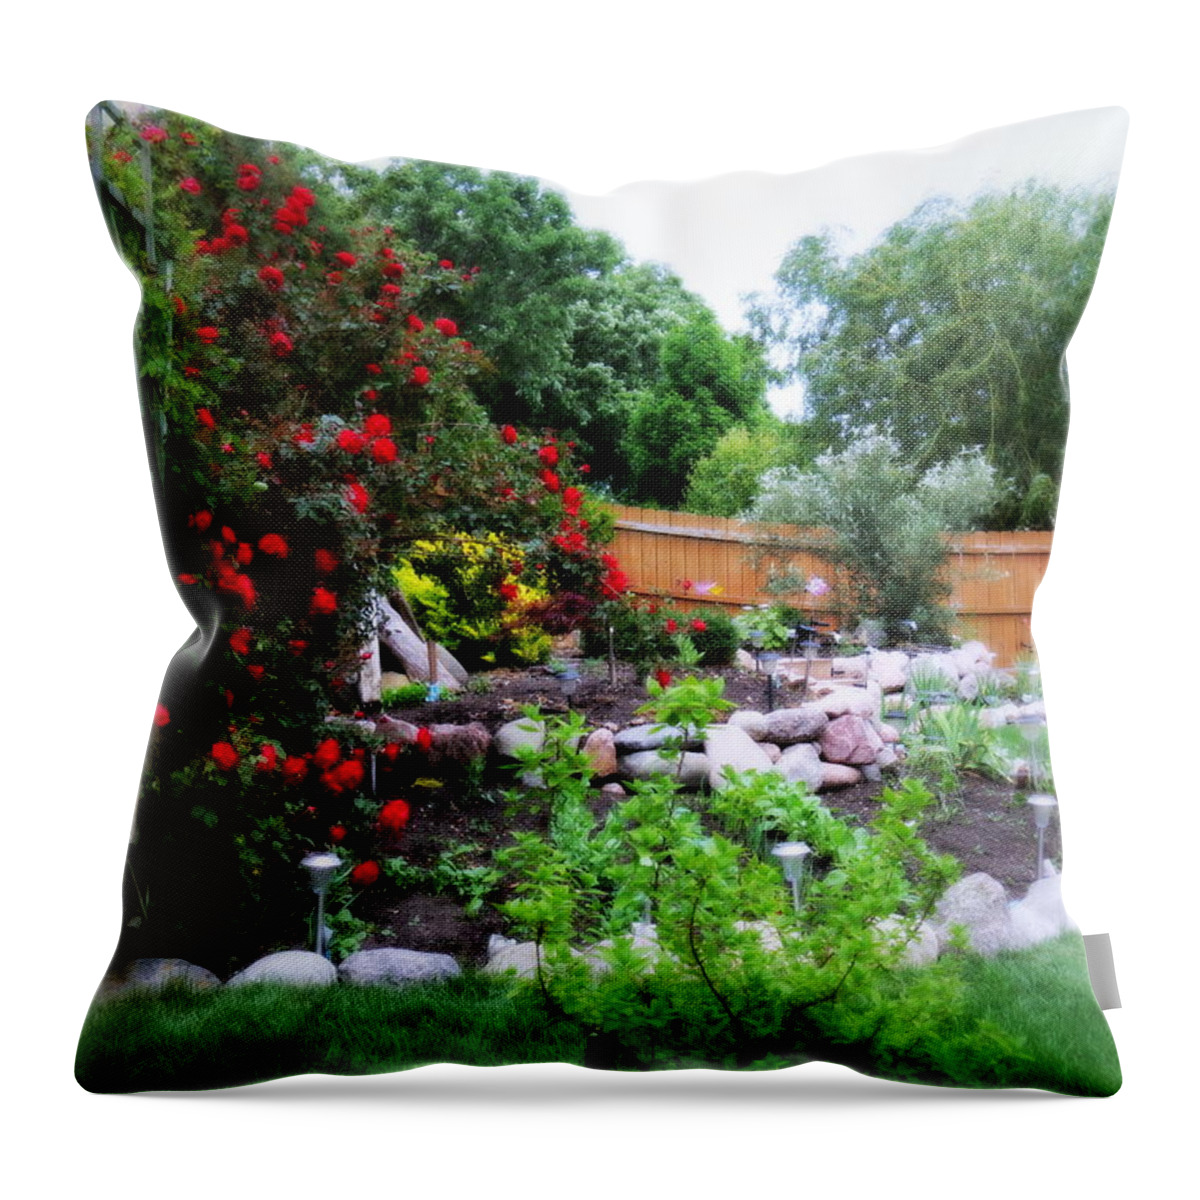 Landscaped Throw Pillow featuring the photograph The Roses Are Blooming by Kay Novy